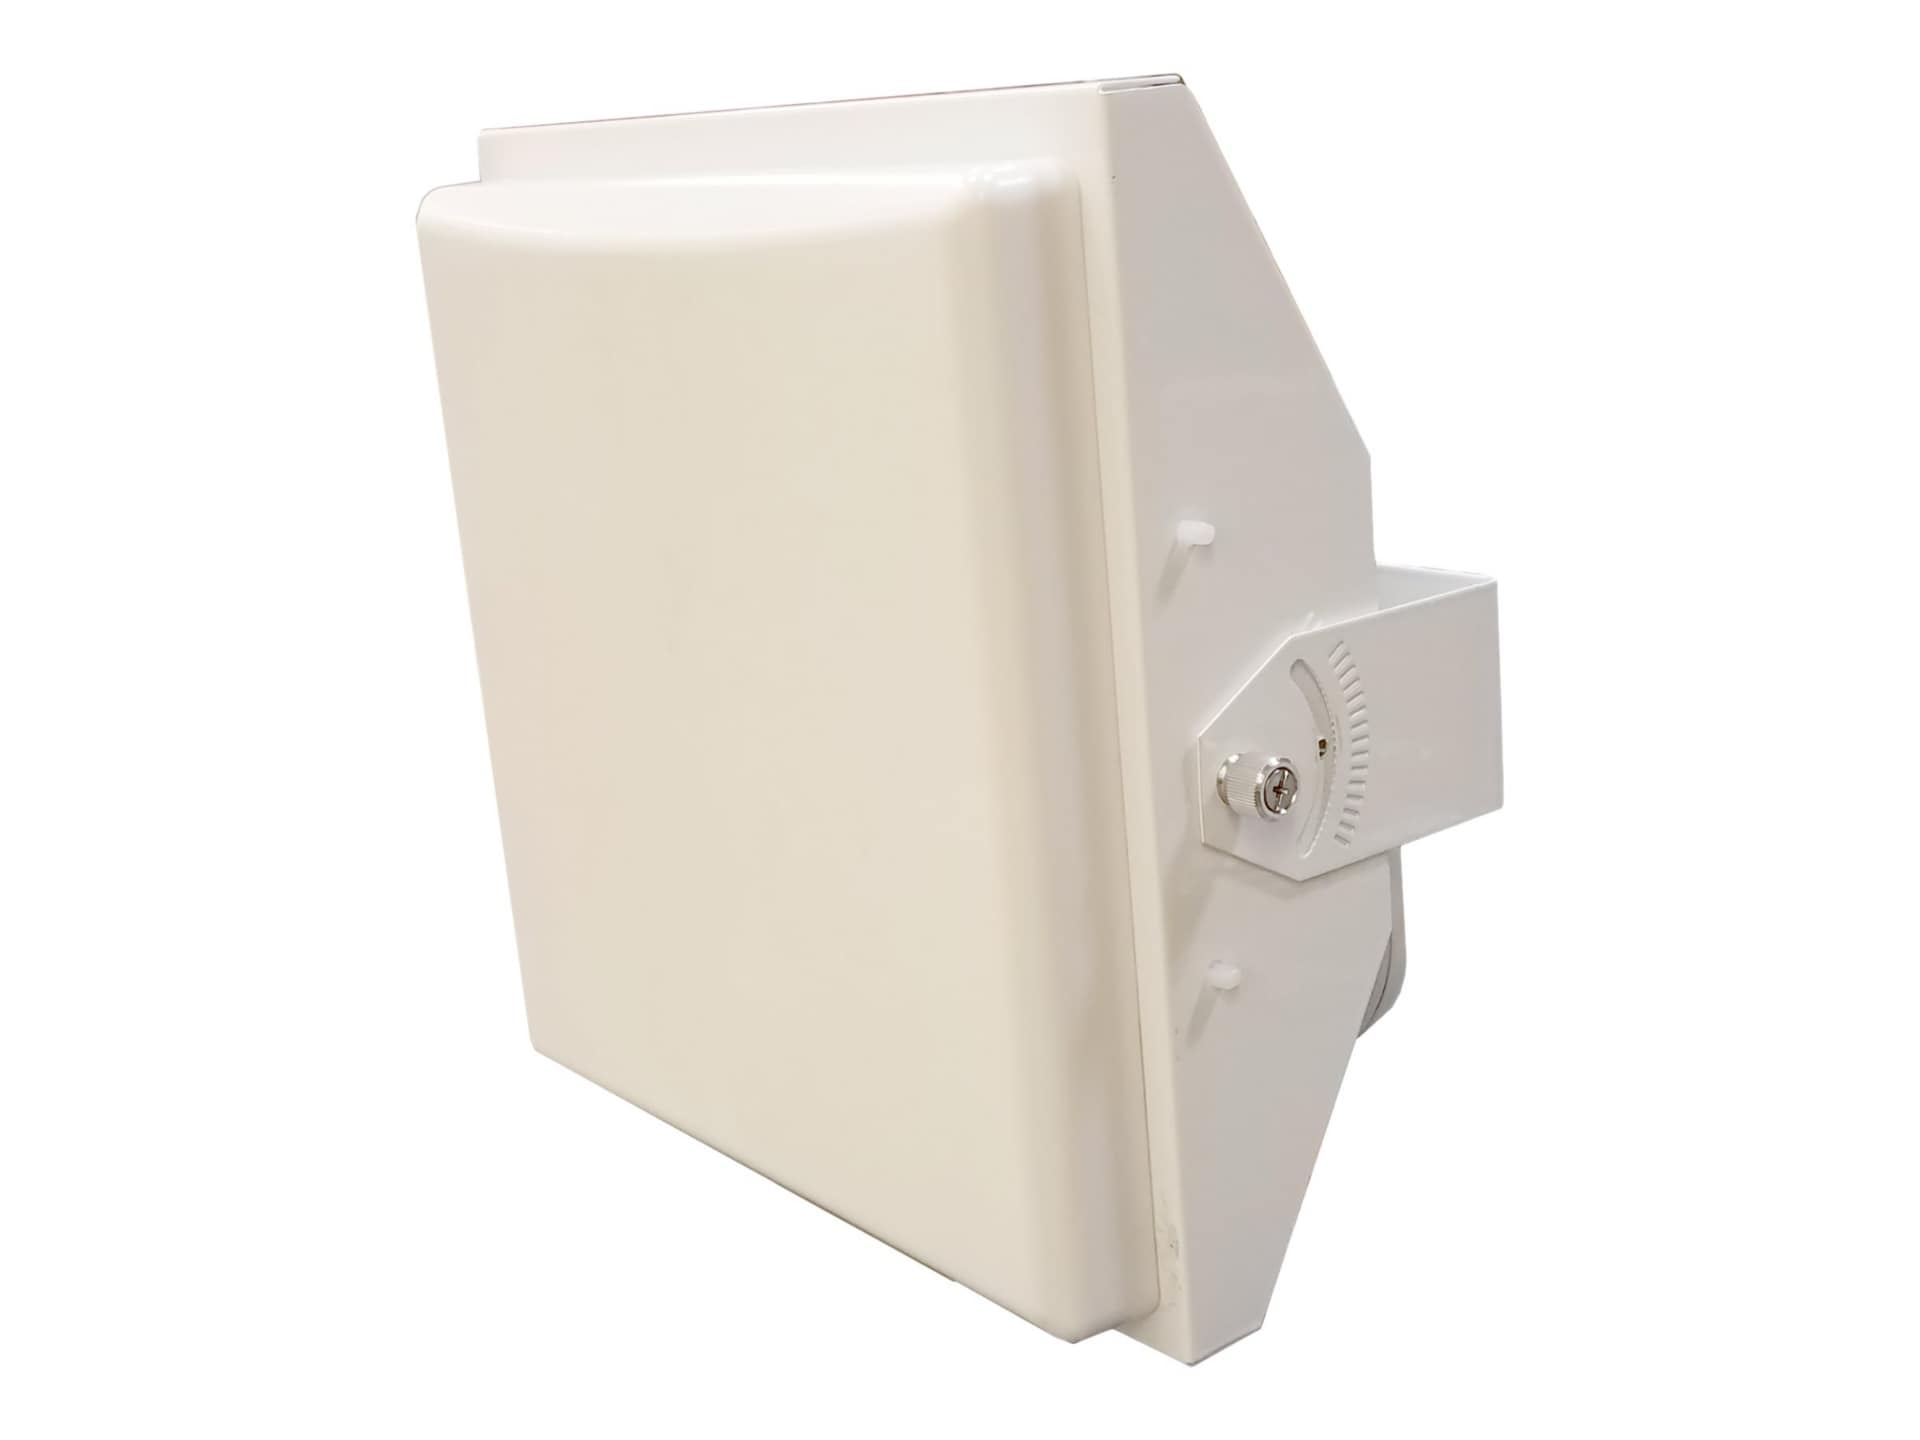 Ventev Single-Axis Universal Co-Locating Mount - wireless access point and